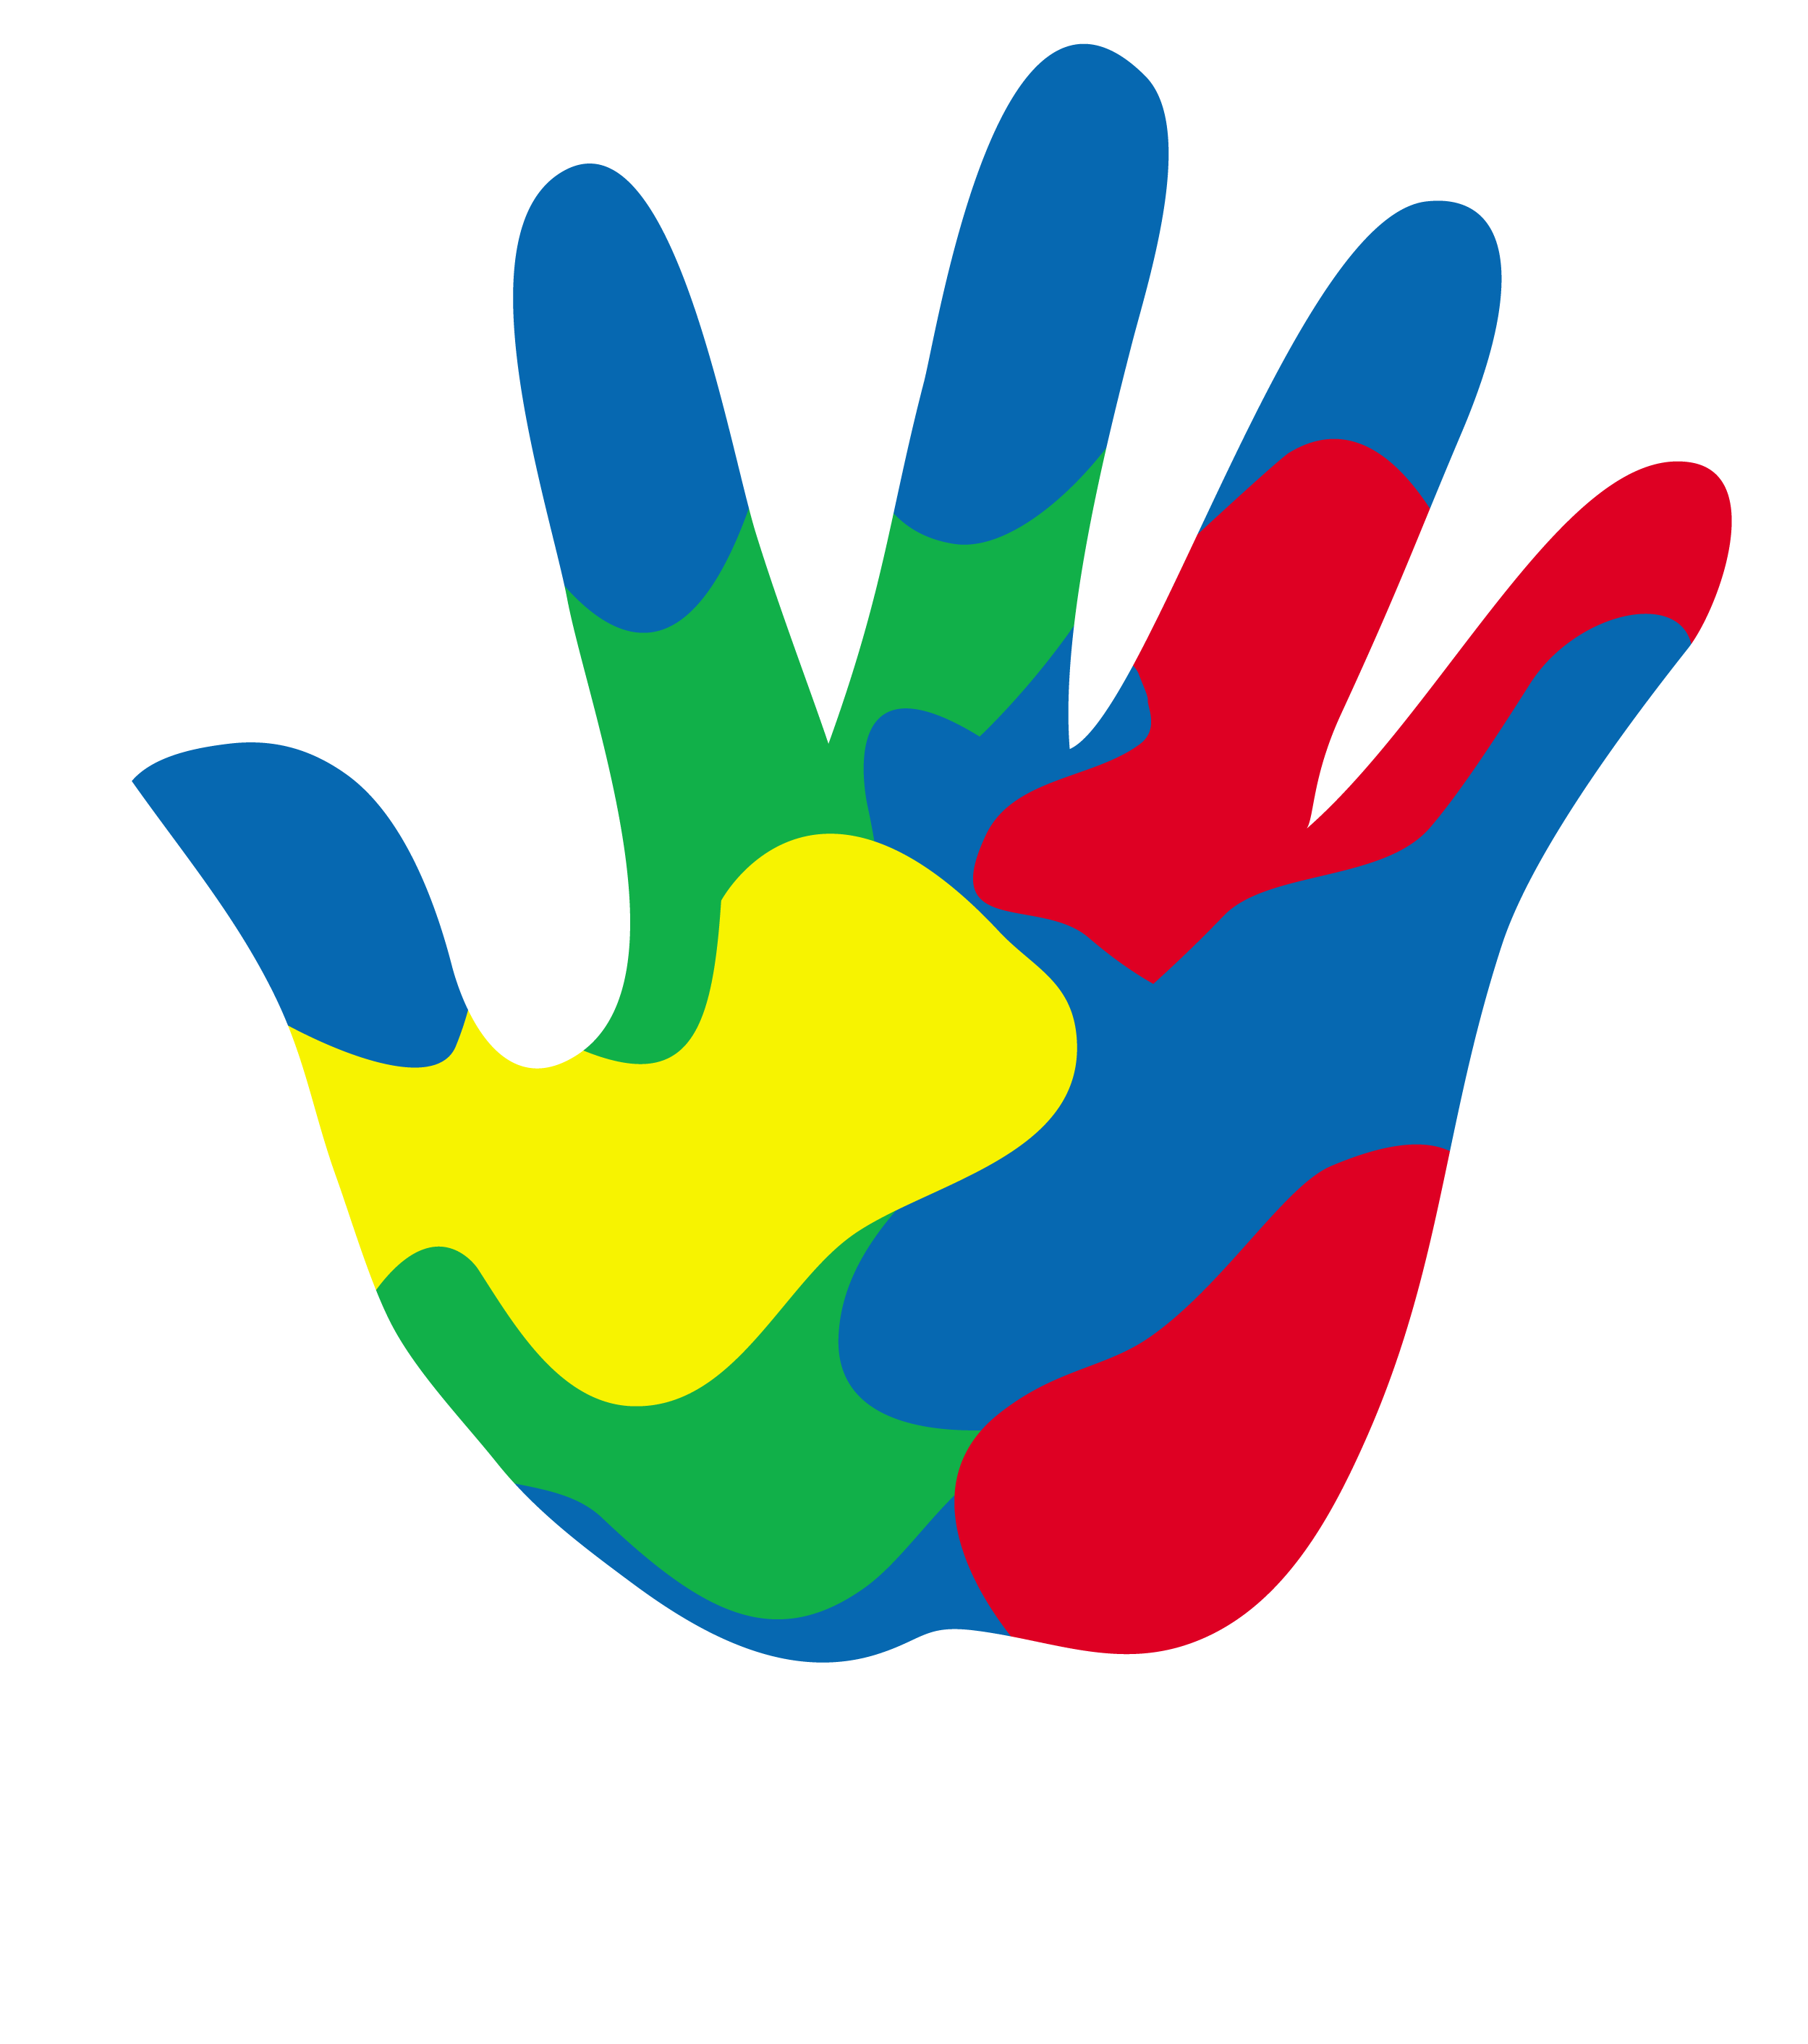 Helping Hands Clipart